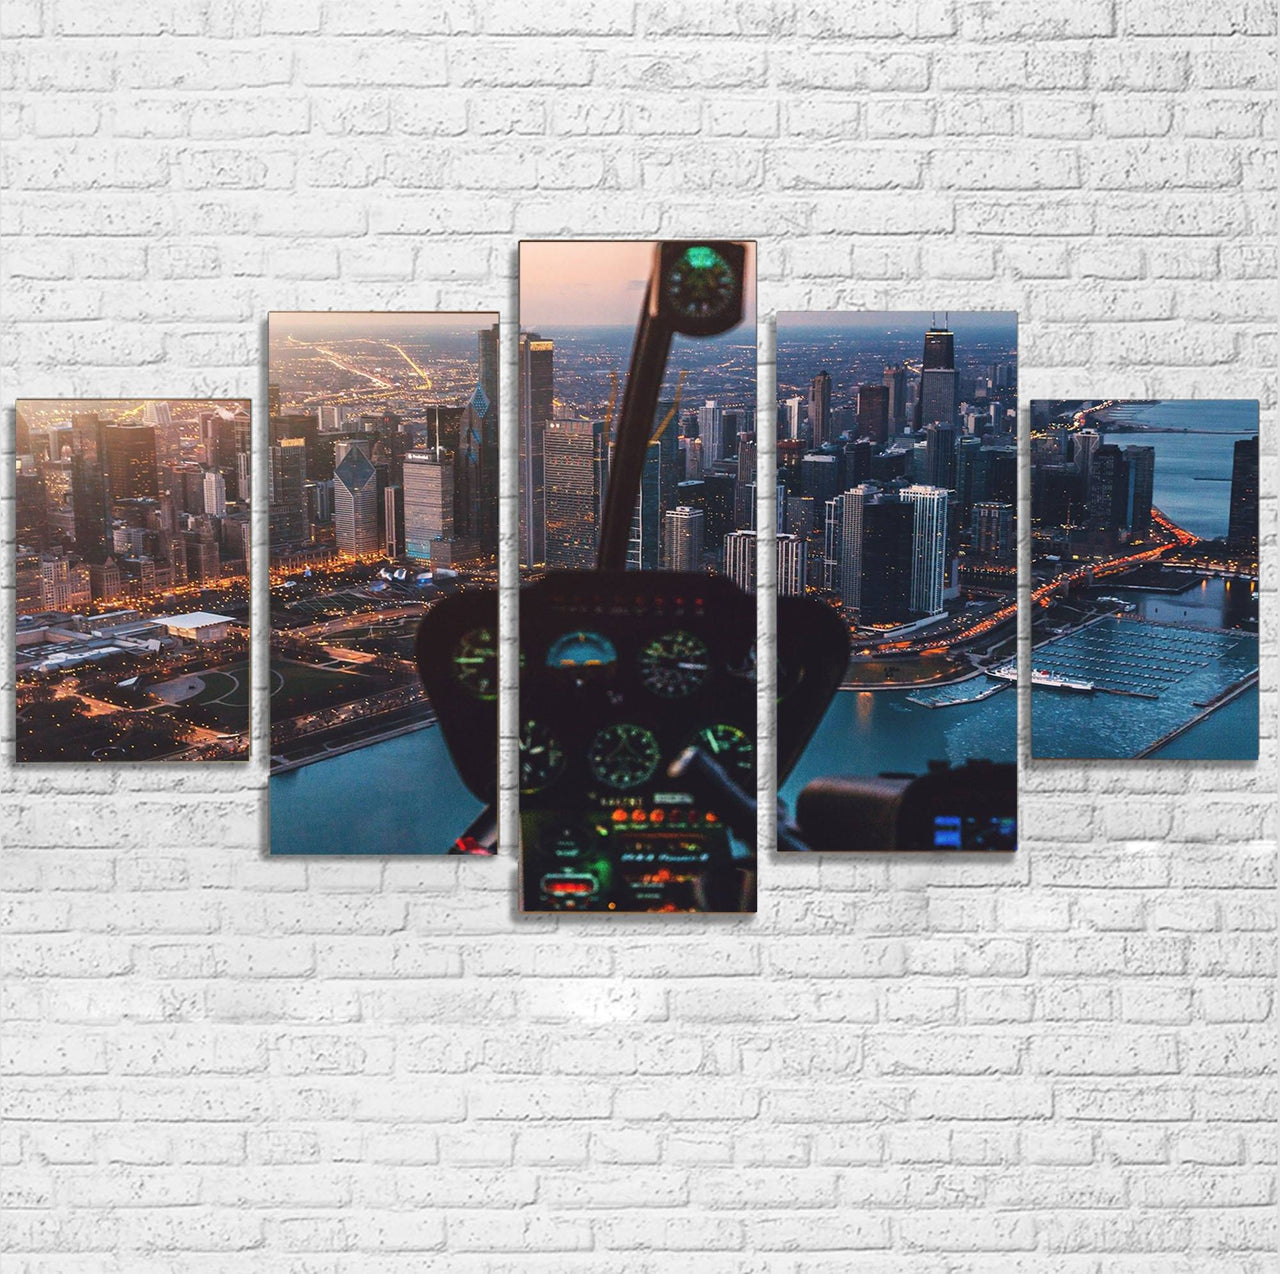 Amazing City View from Helicopter Cockpit Printed Multiple Canvas Poster Aviation Shop 